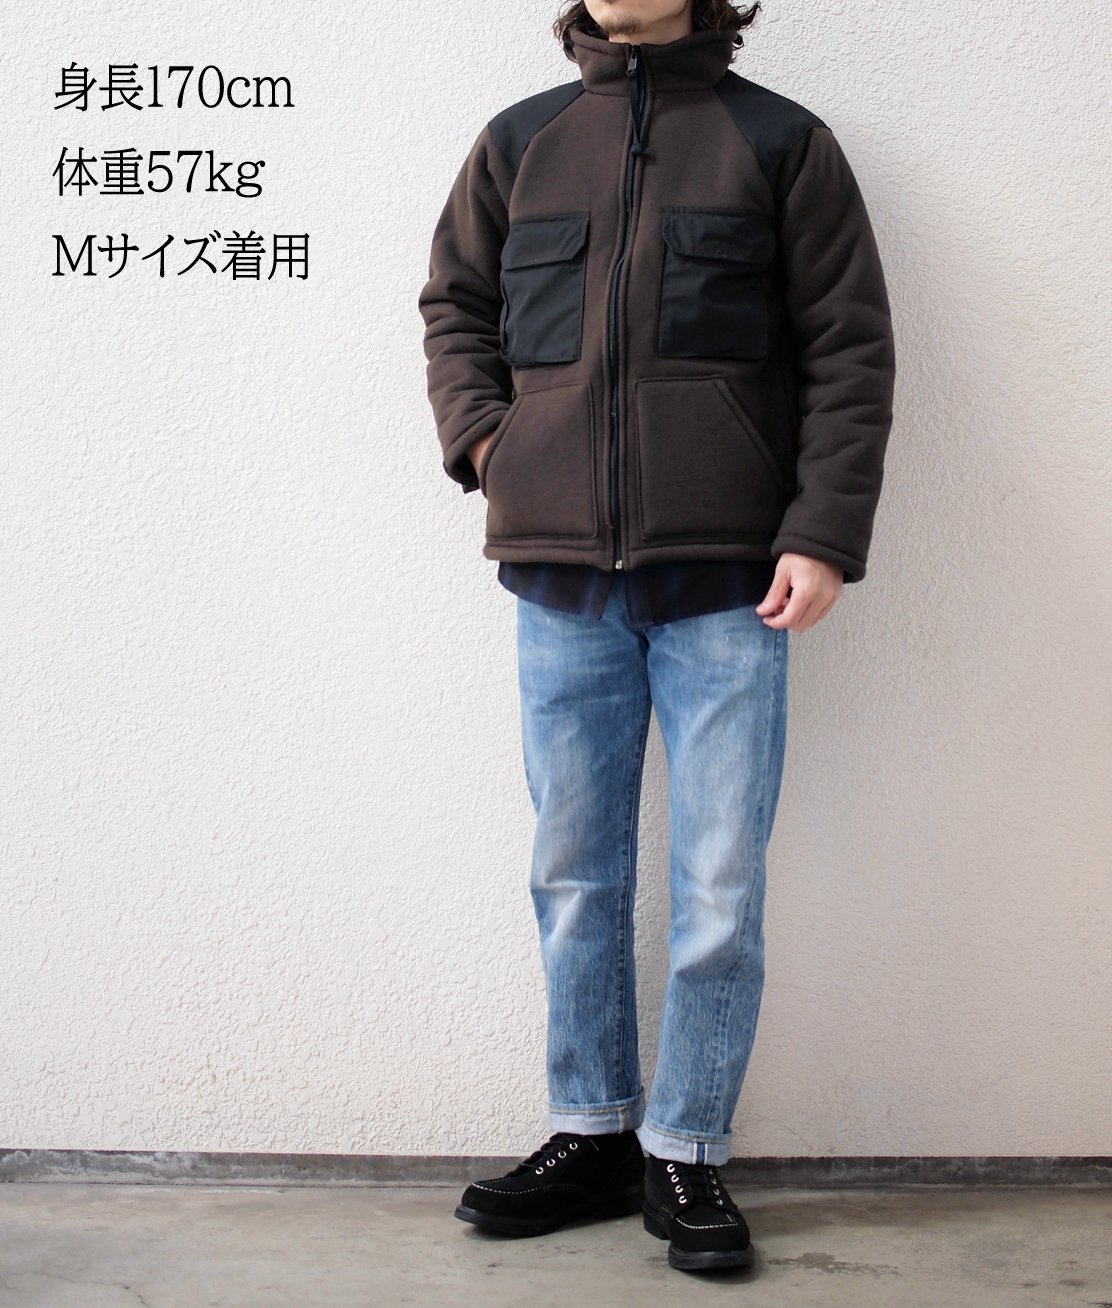 DEAD STOCK】U.S.ARMY ECWCS COLD WEATHER FLEECE JACKET 米軍 実物